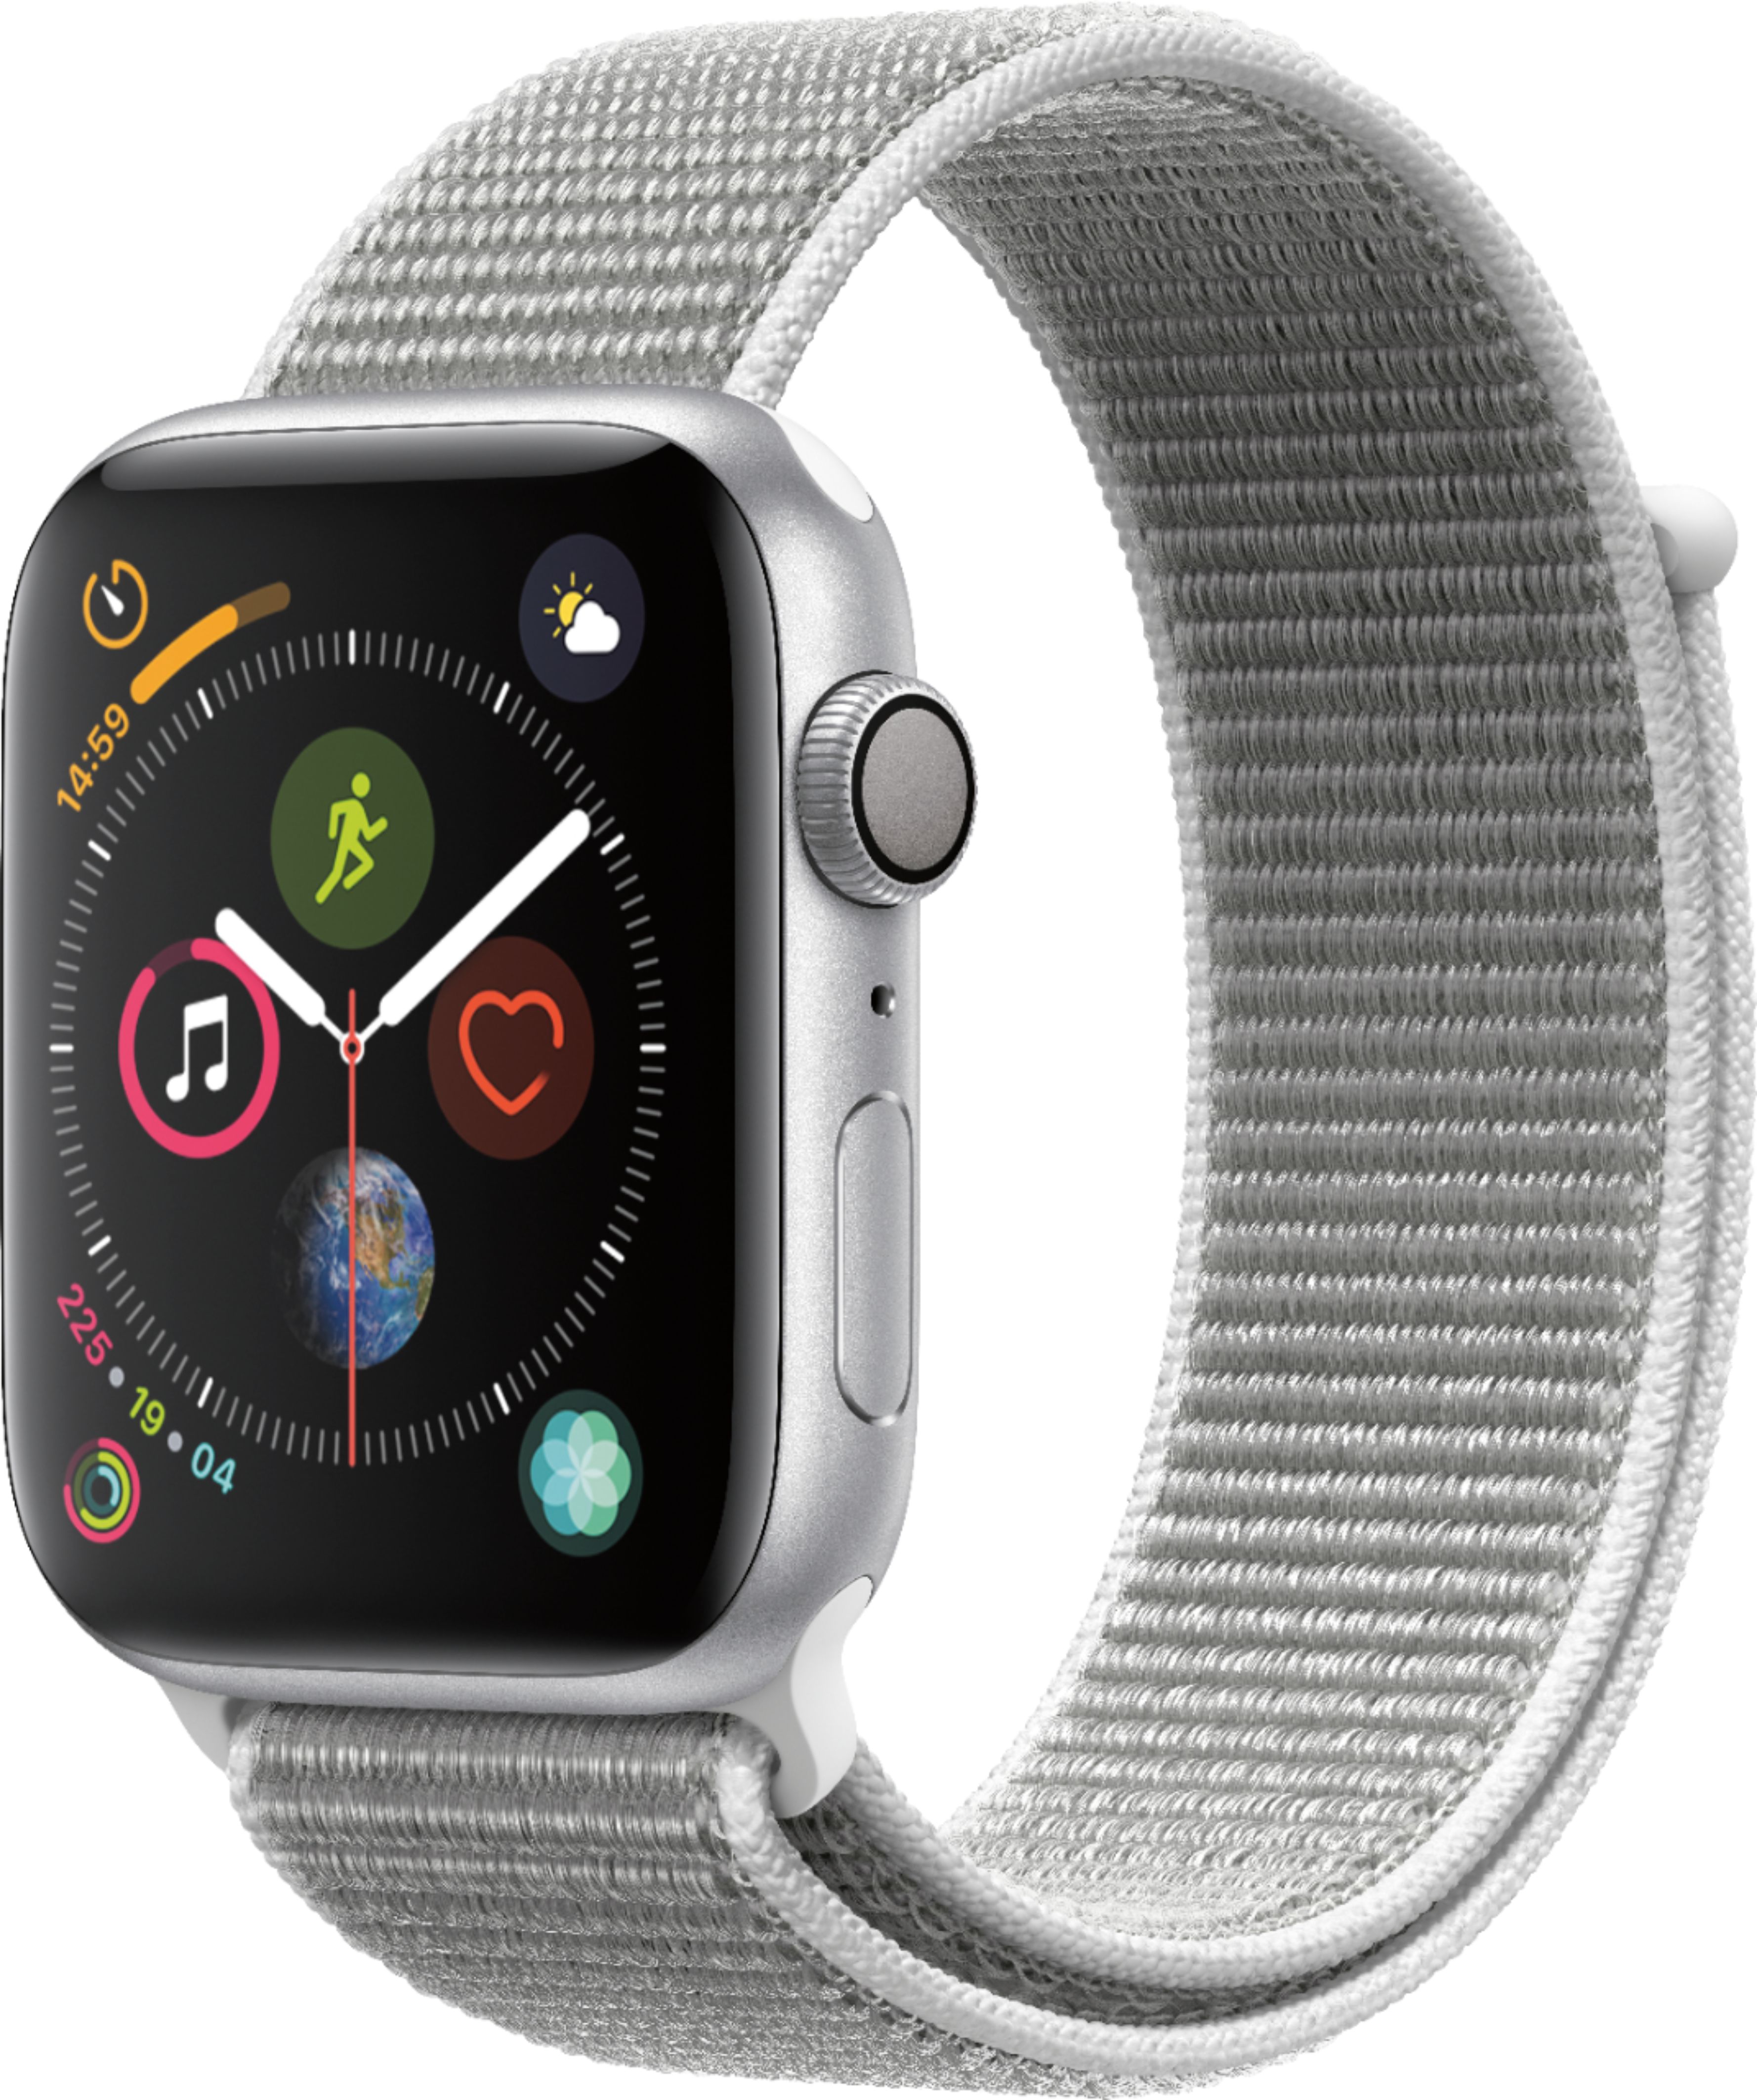 Left View: Apple Watch SE (1st Generation GPS + Cellular) 40mm Space Gray Aluminum Case with Tornado/Gray Sport Loop - Space Gray (Verizon)